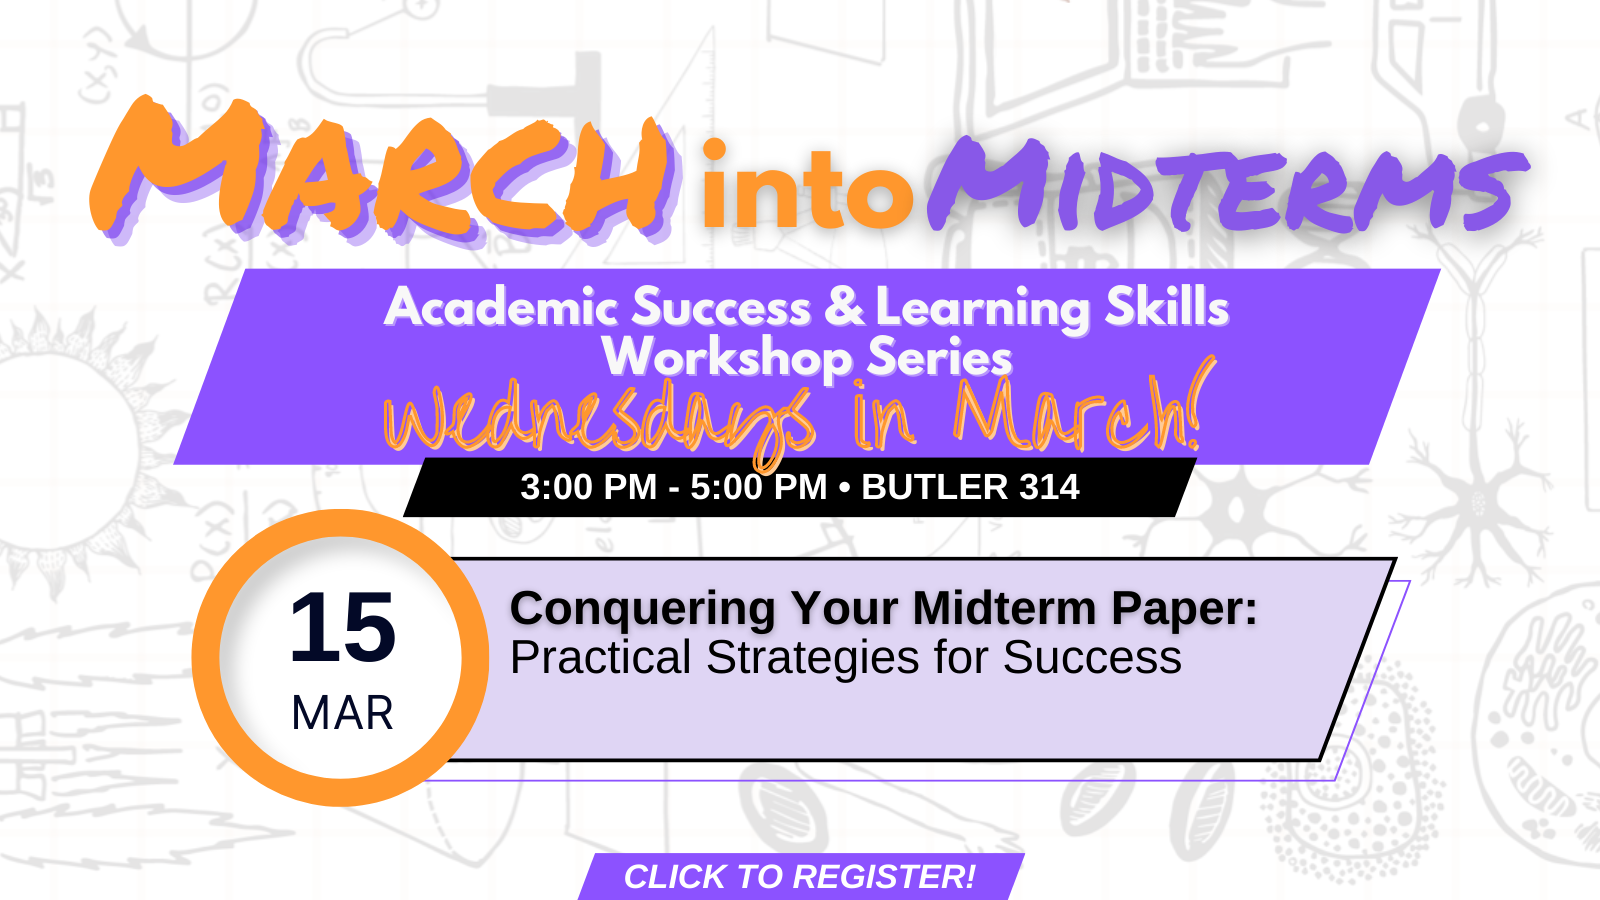 Flyer for March into Midterms workshop. Conquering your midterm paper: practical strategies for success. March 15, 3 to 5pm in Butler 314. Workshops are every Wednesday in March. Click image to register.